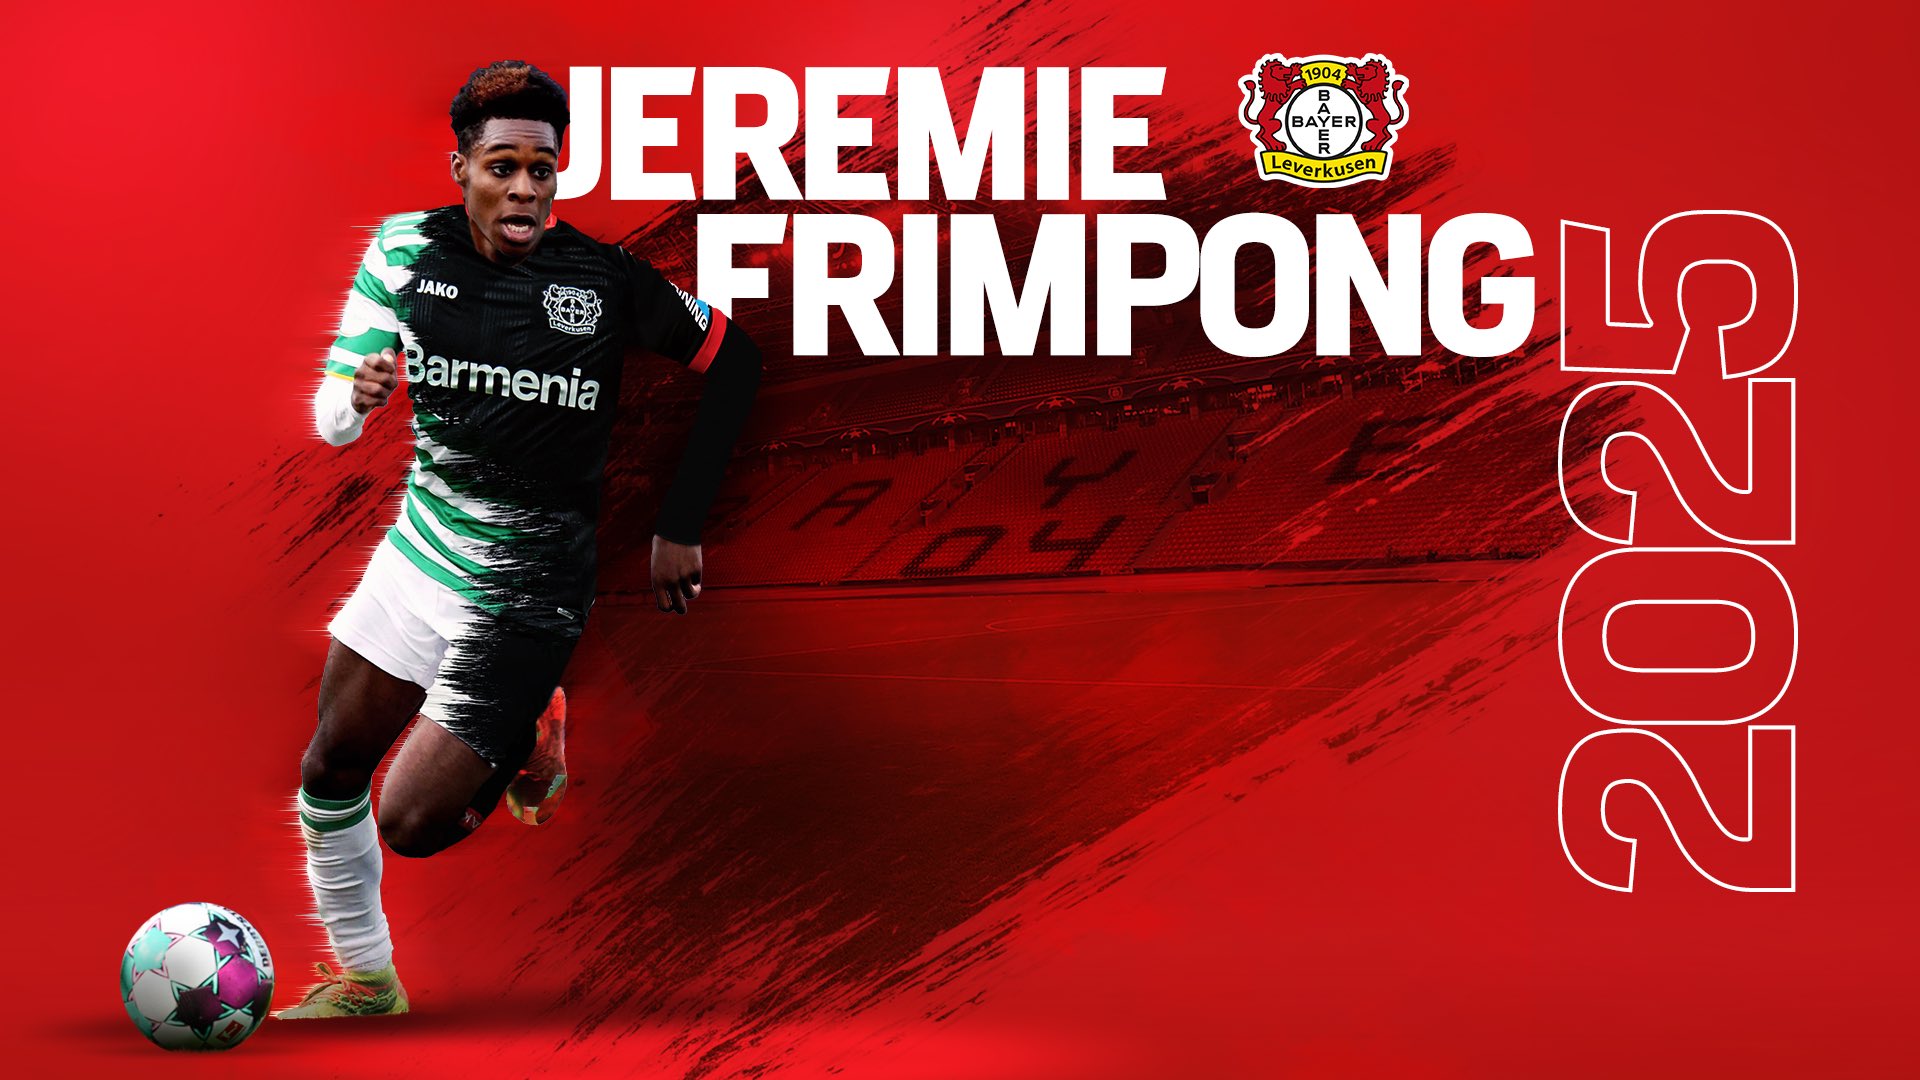 Bayer 04 Leverkusen on Twitter: "🚨 TRANSFER NEWS 🚨 Jeremie Frimpong joins the Werkself from @CelticFC on a 04-year deal!… "